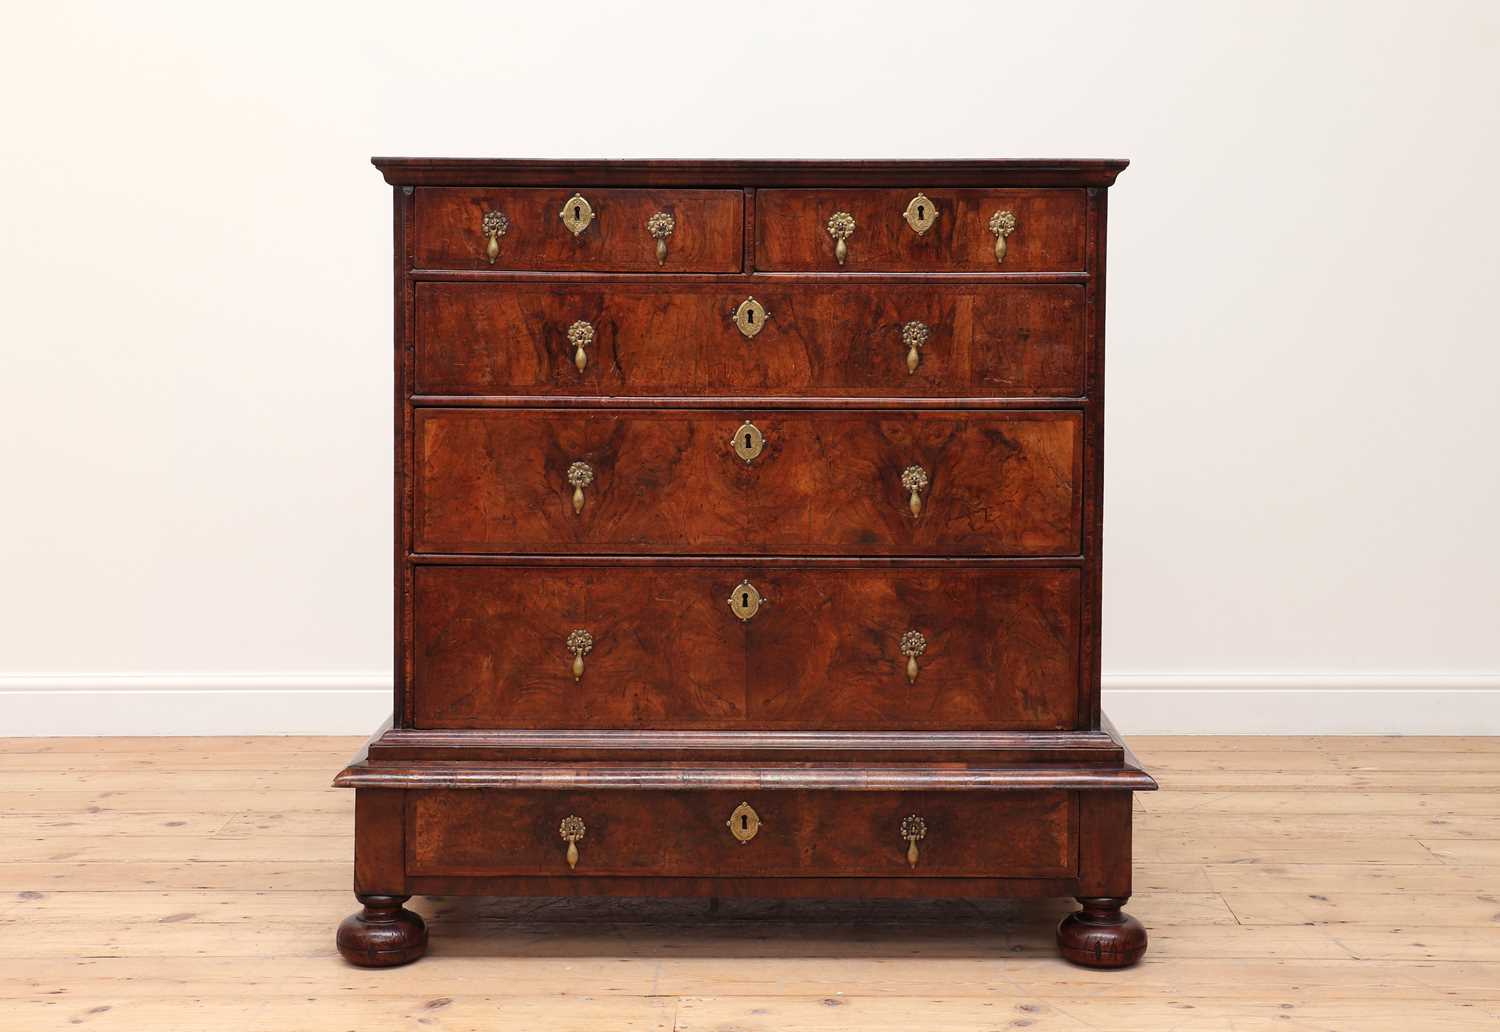 Lot 151 - A George I-style walnut chest on stand